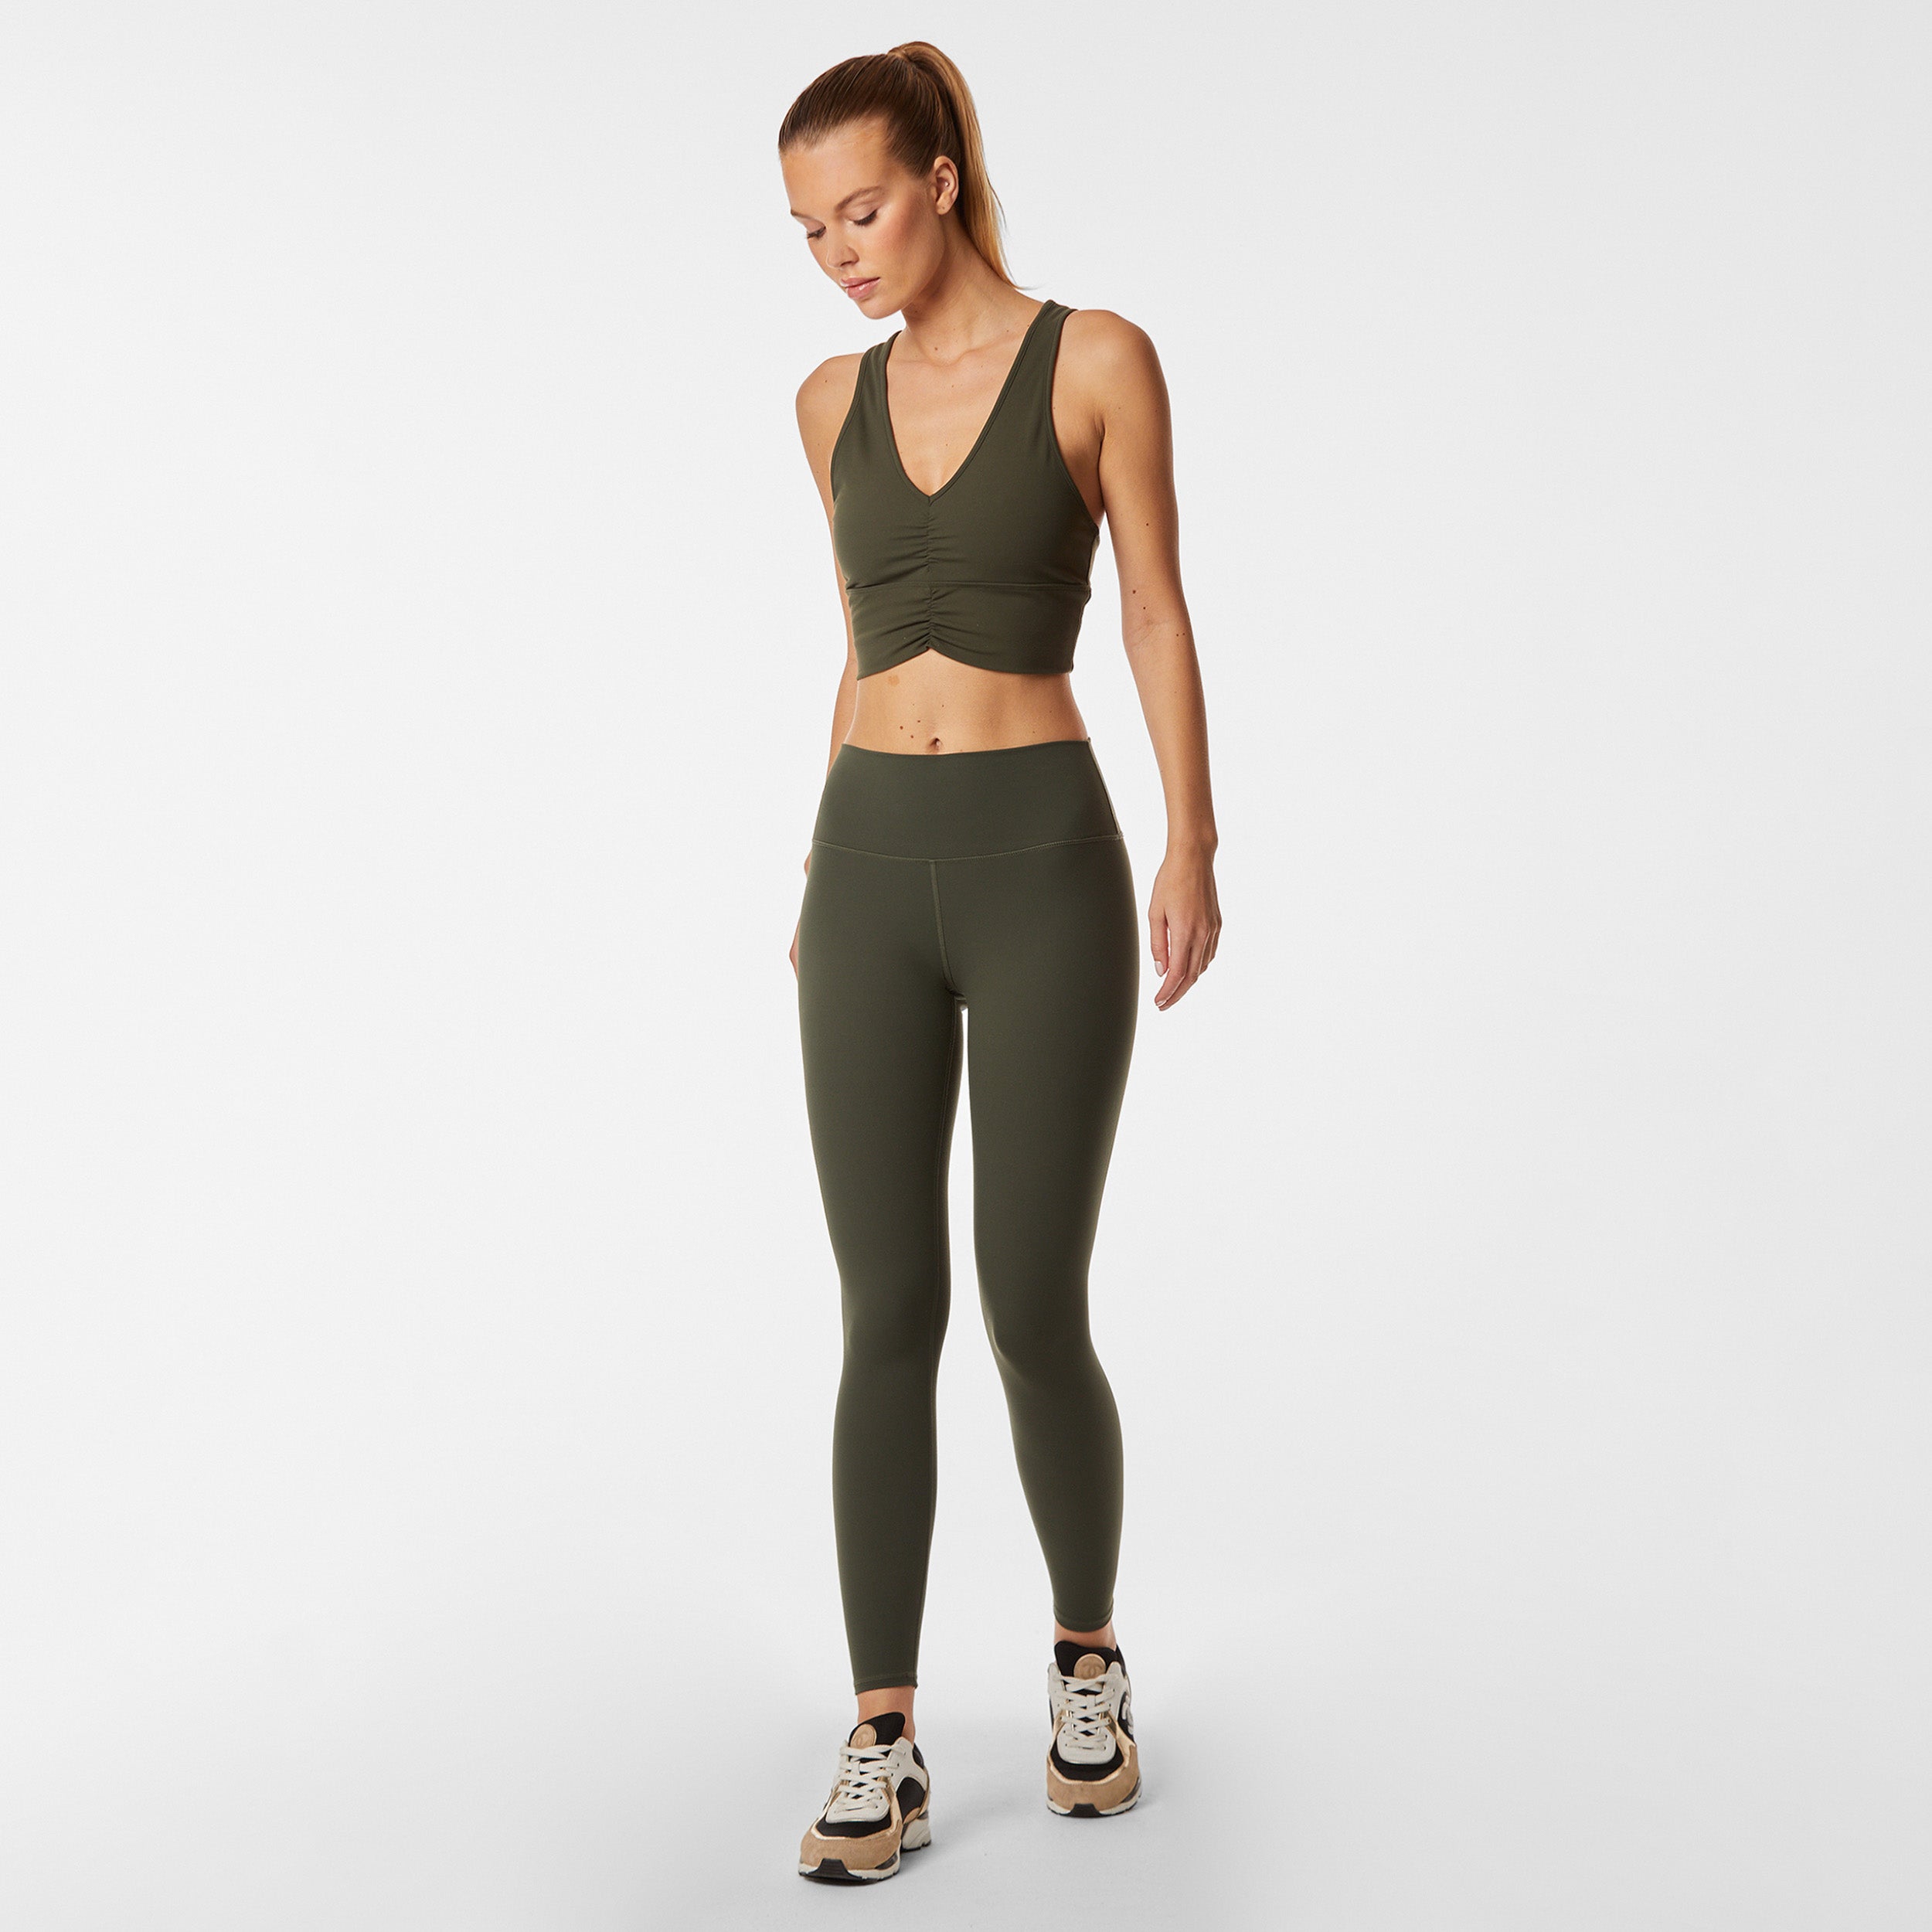 Full body view of woman wearing ruched front green racerback bra and matching legging